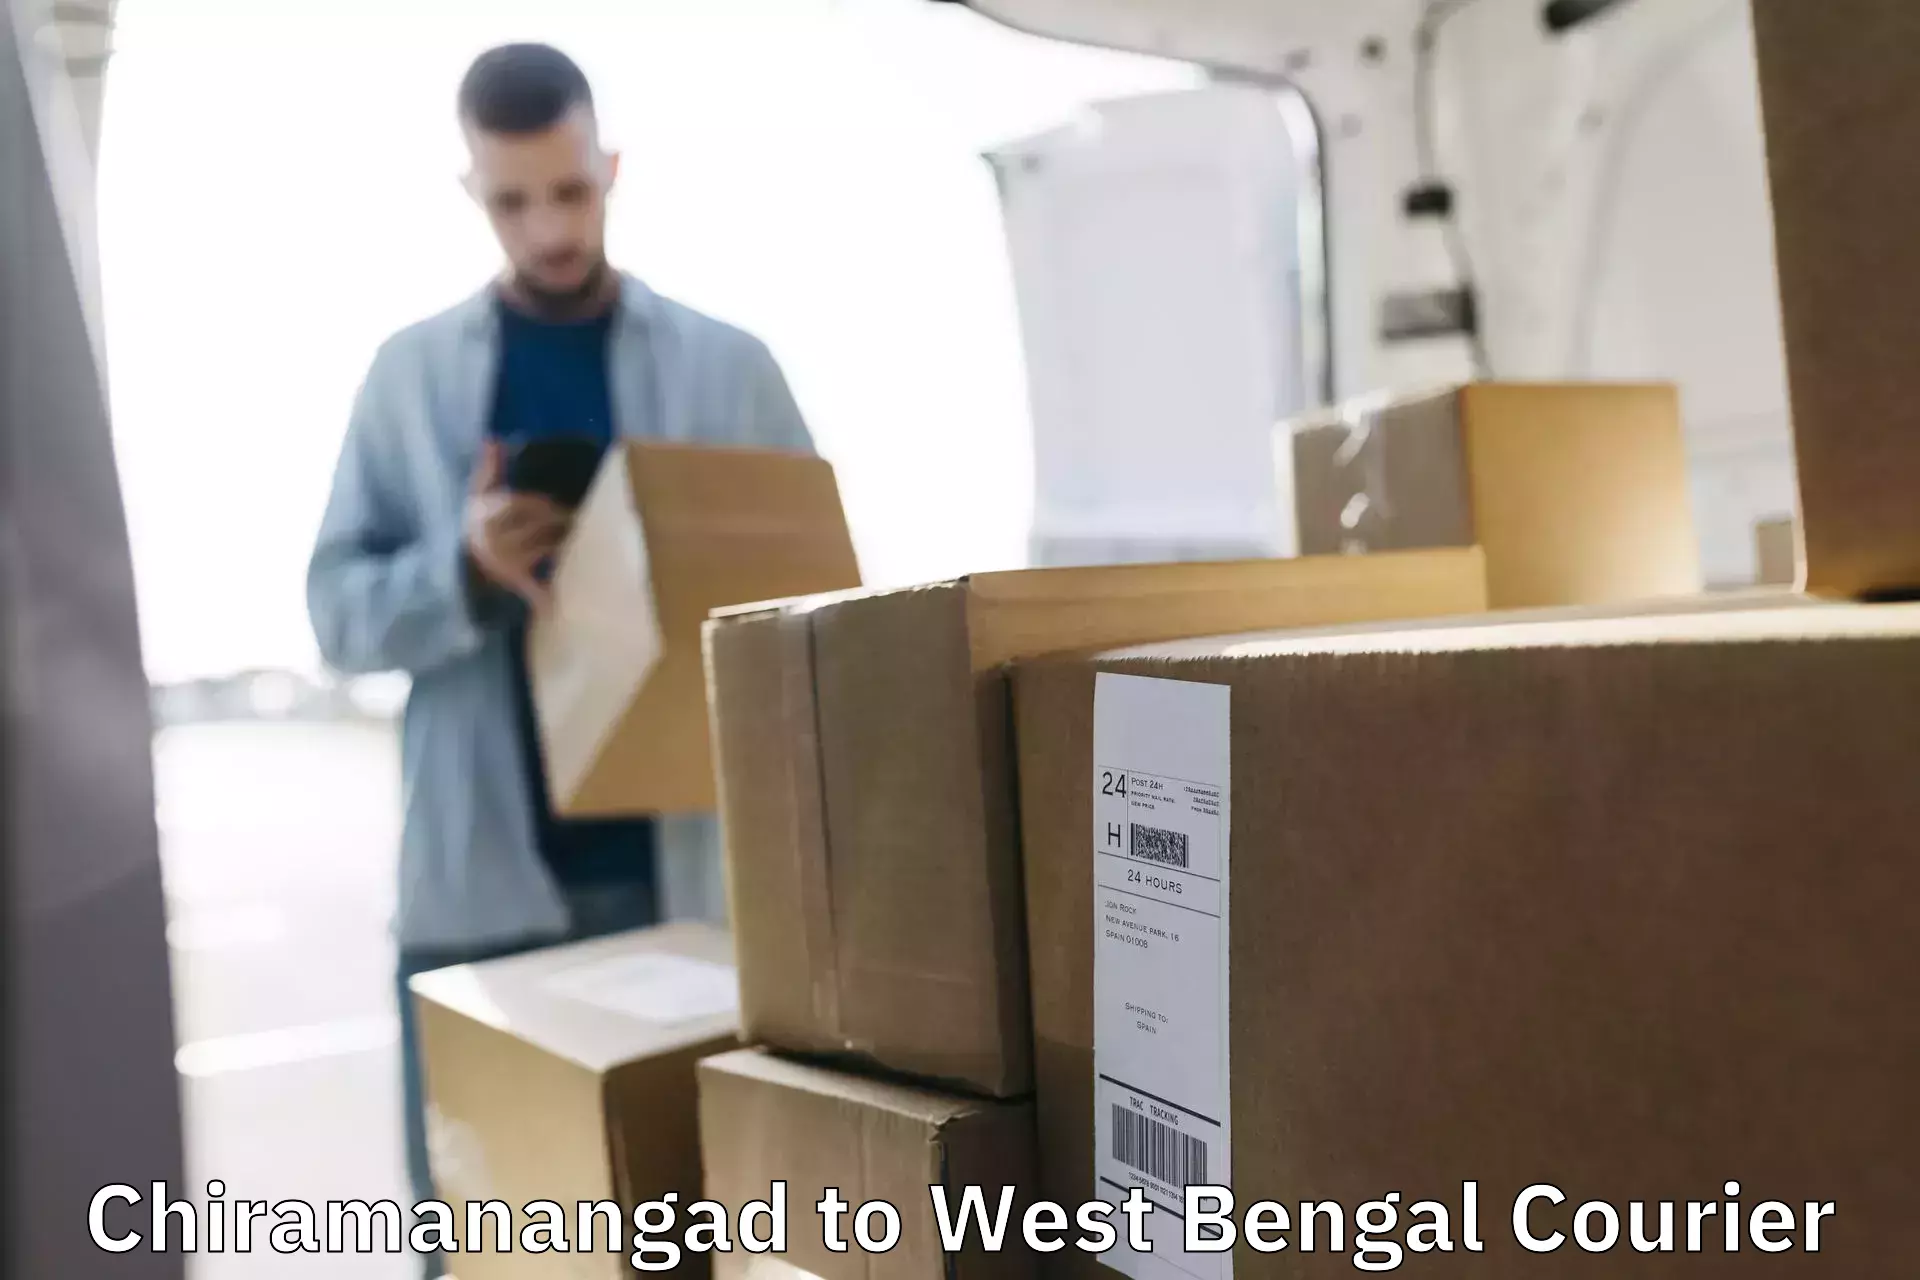 Express delivery solutions Chiramanangad to Malda